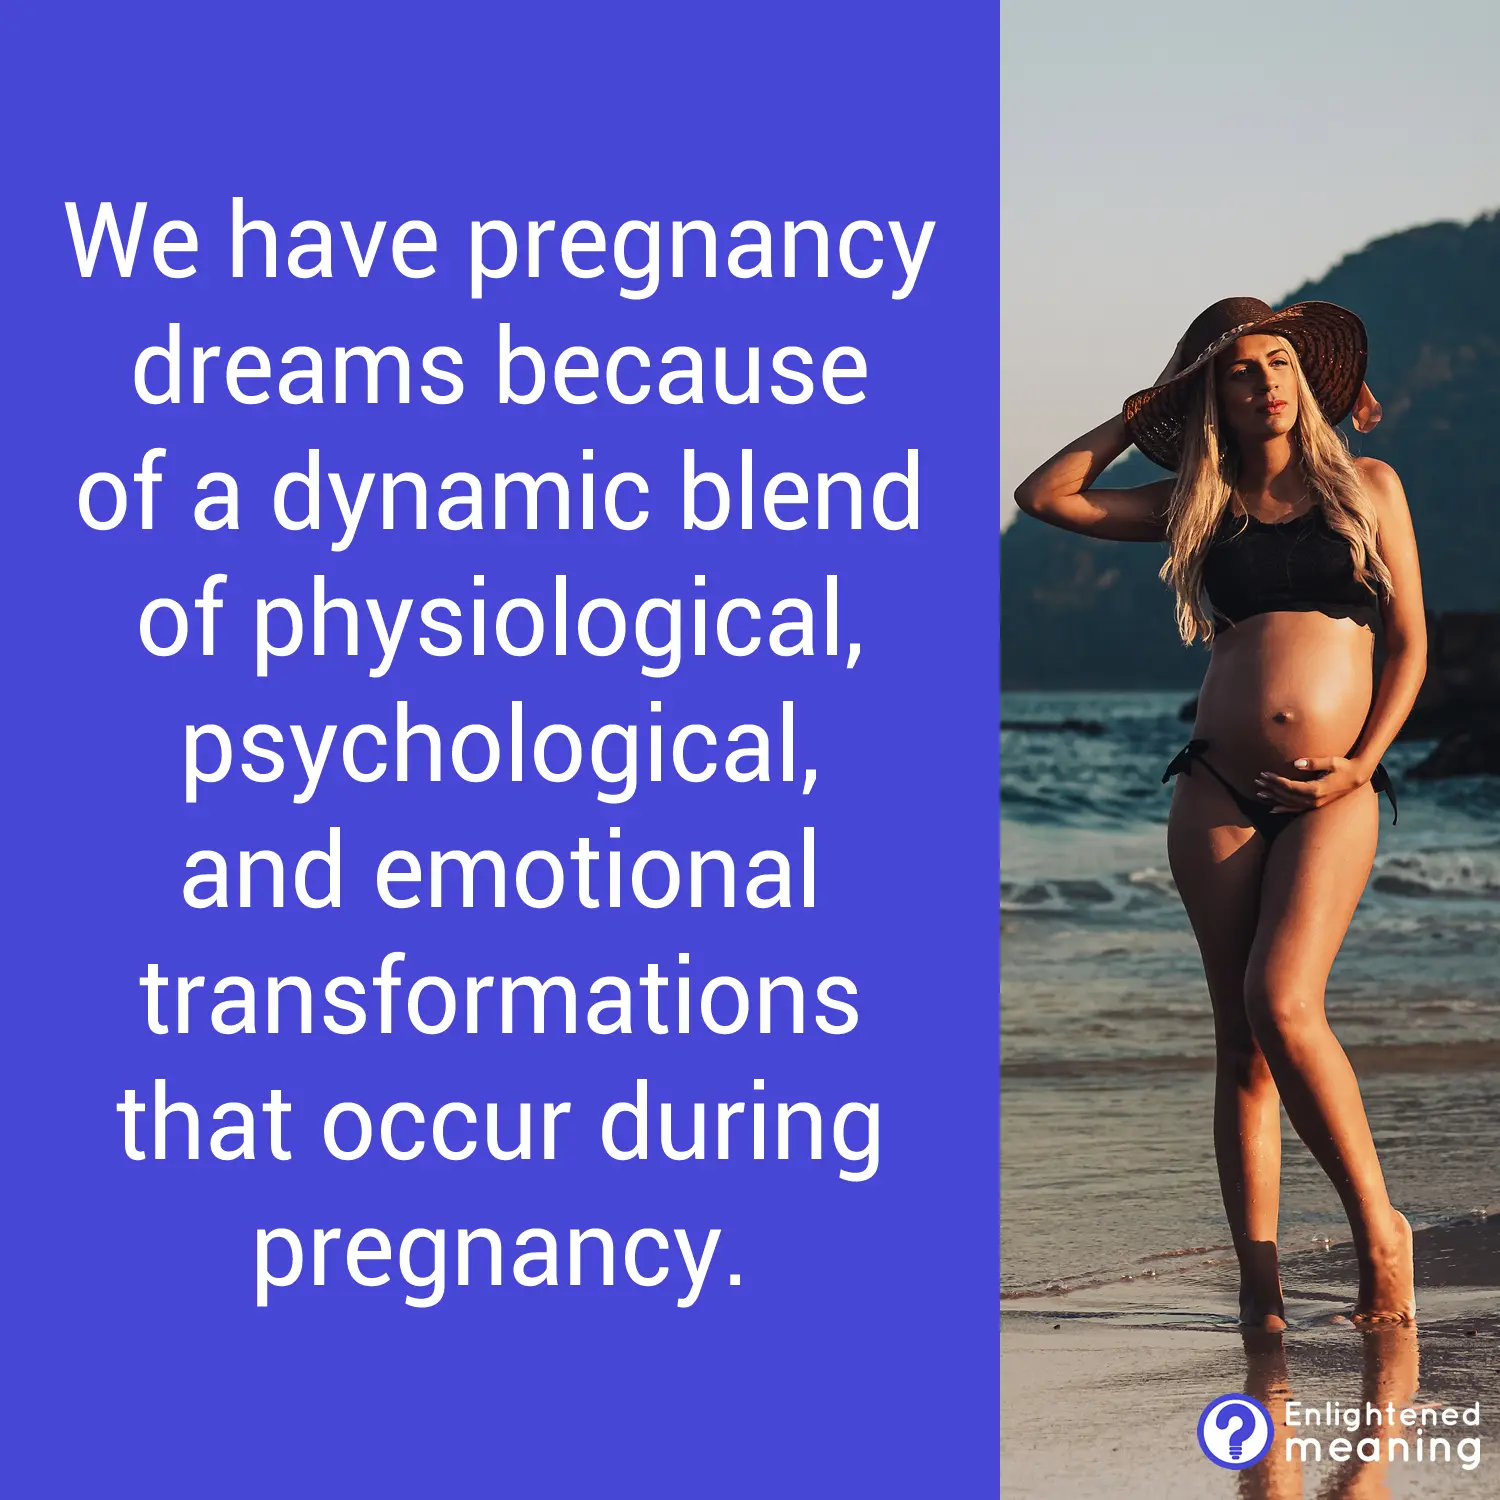 The meaning of pregnancy dreams